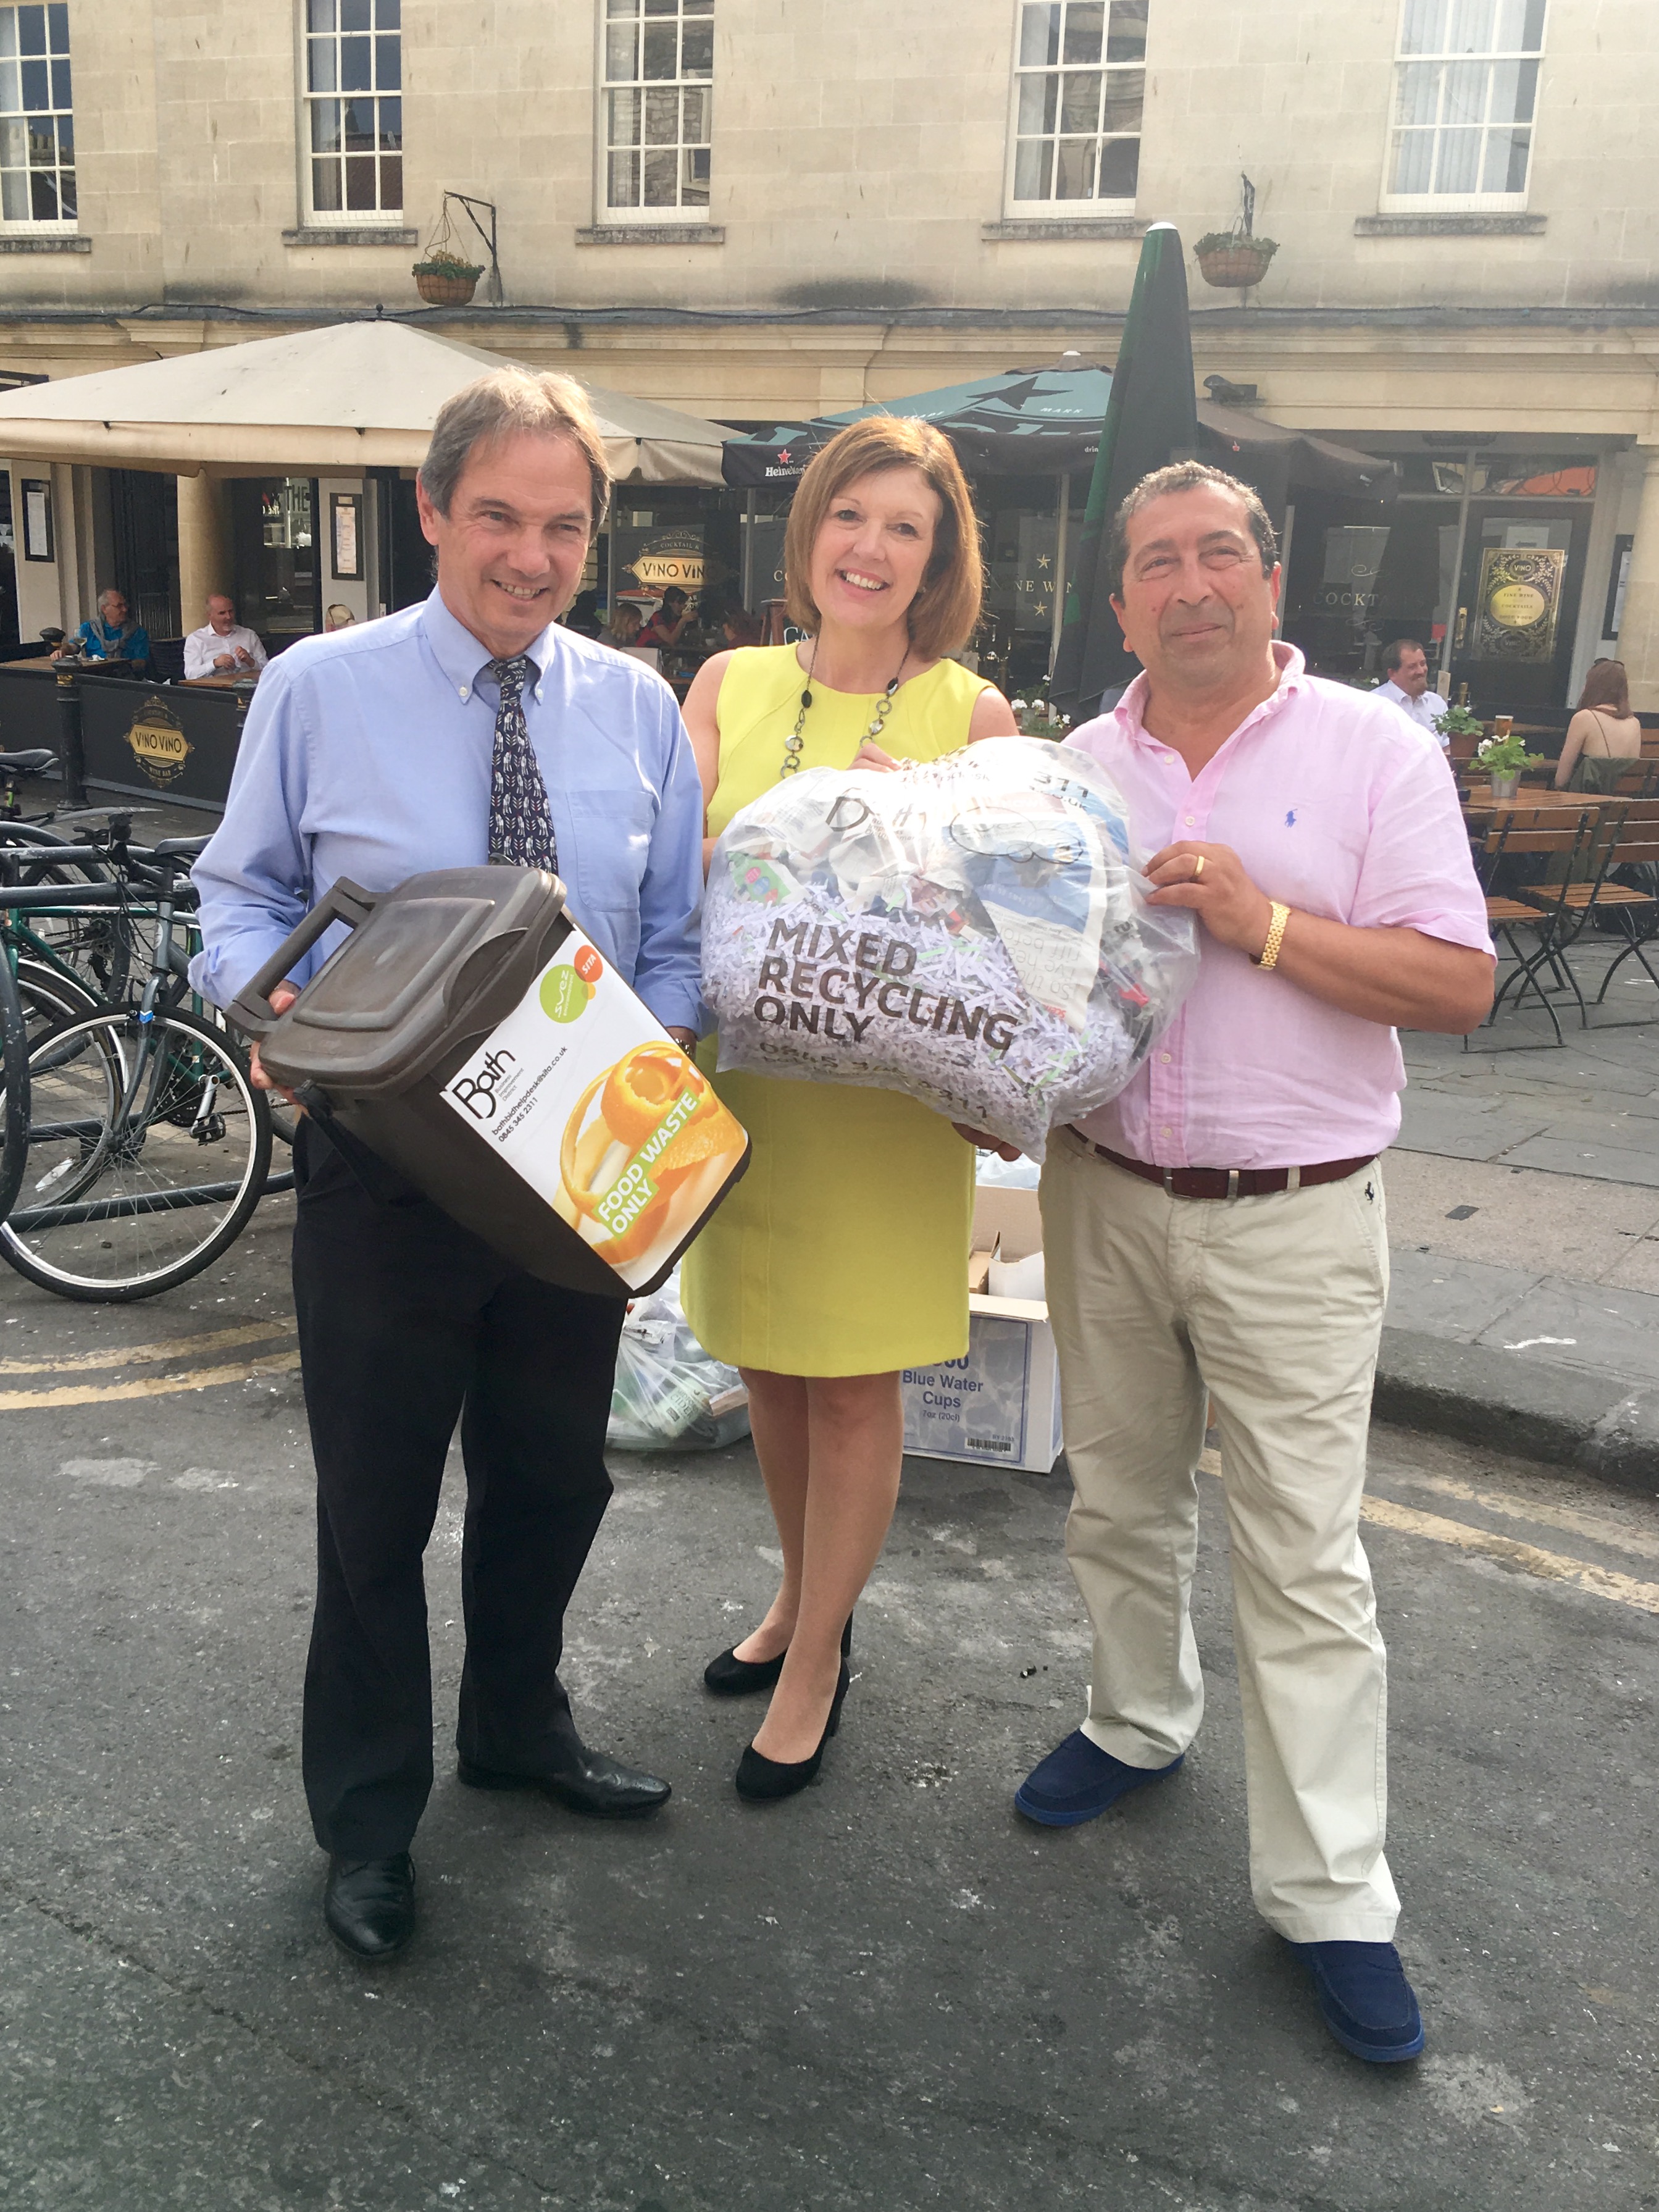 City centre waste trial aims to rid streets of rubbish and boost evening economy